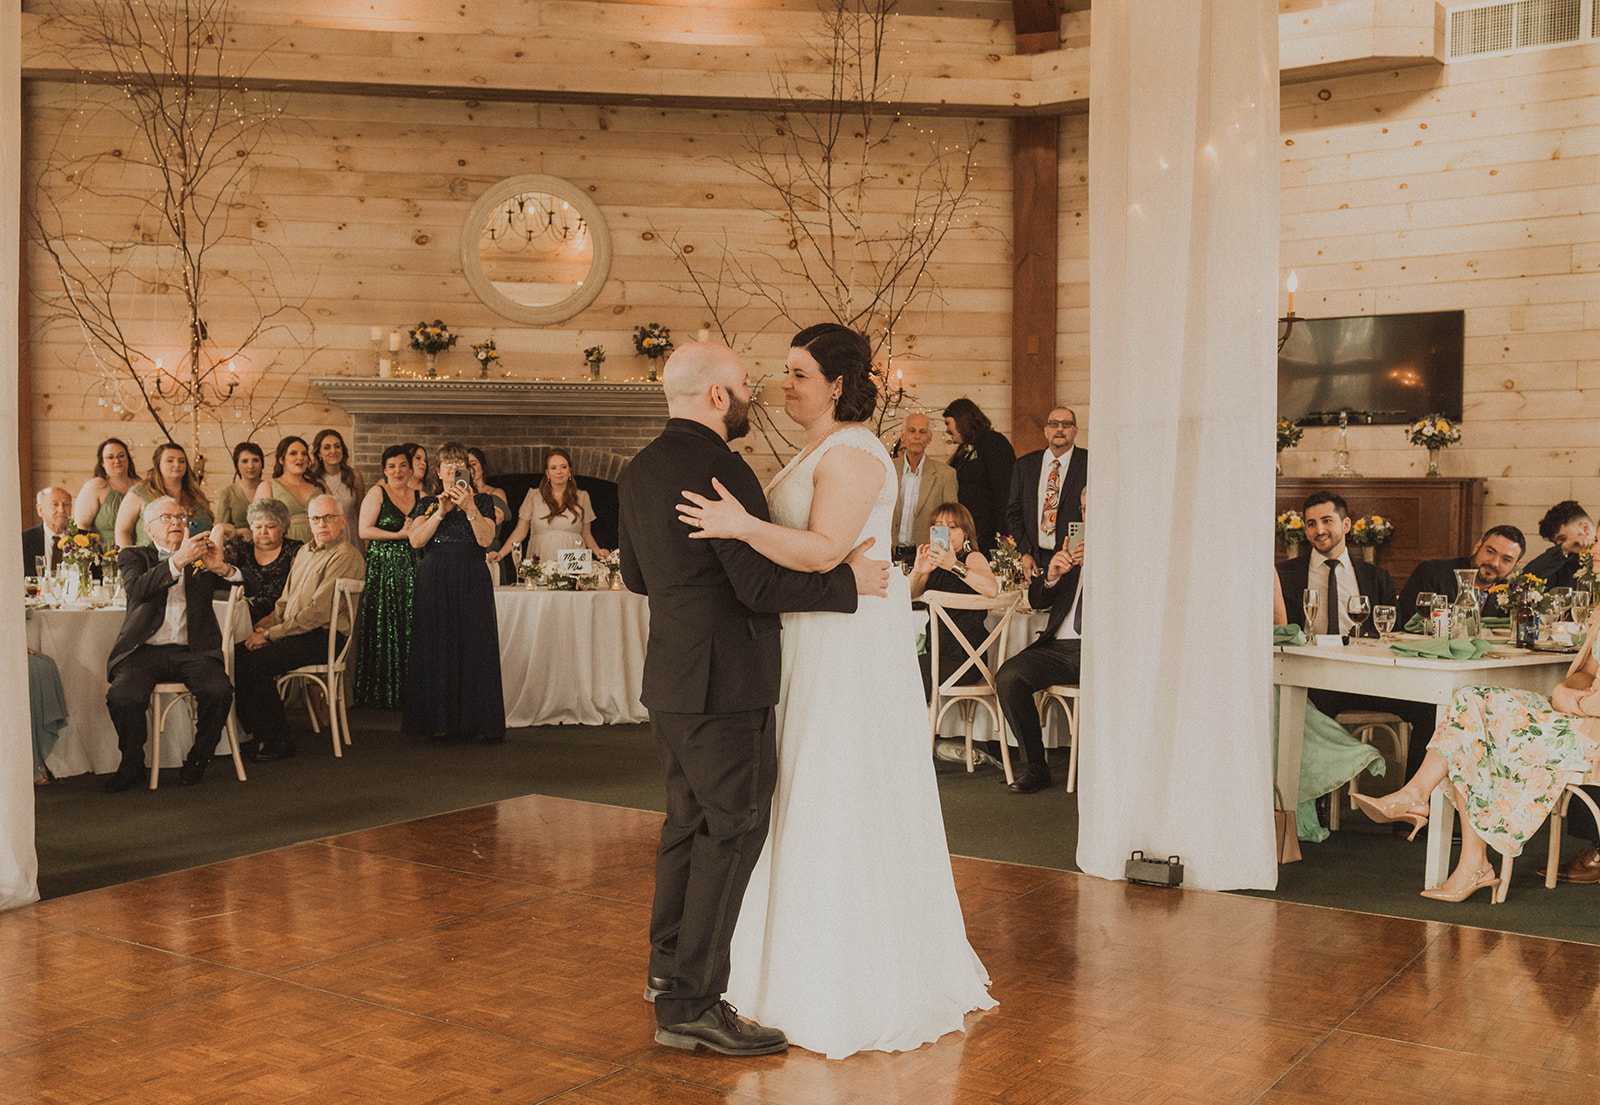 Bride and groom share their romantic first dance at their dreamy upstate New York wedding